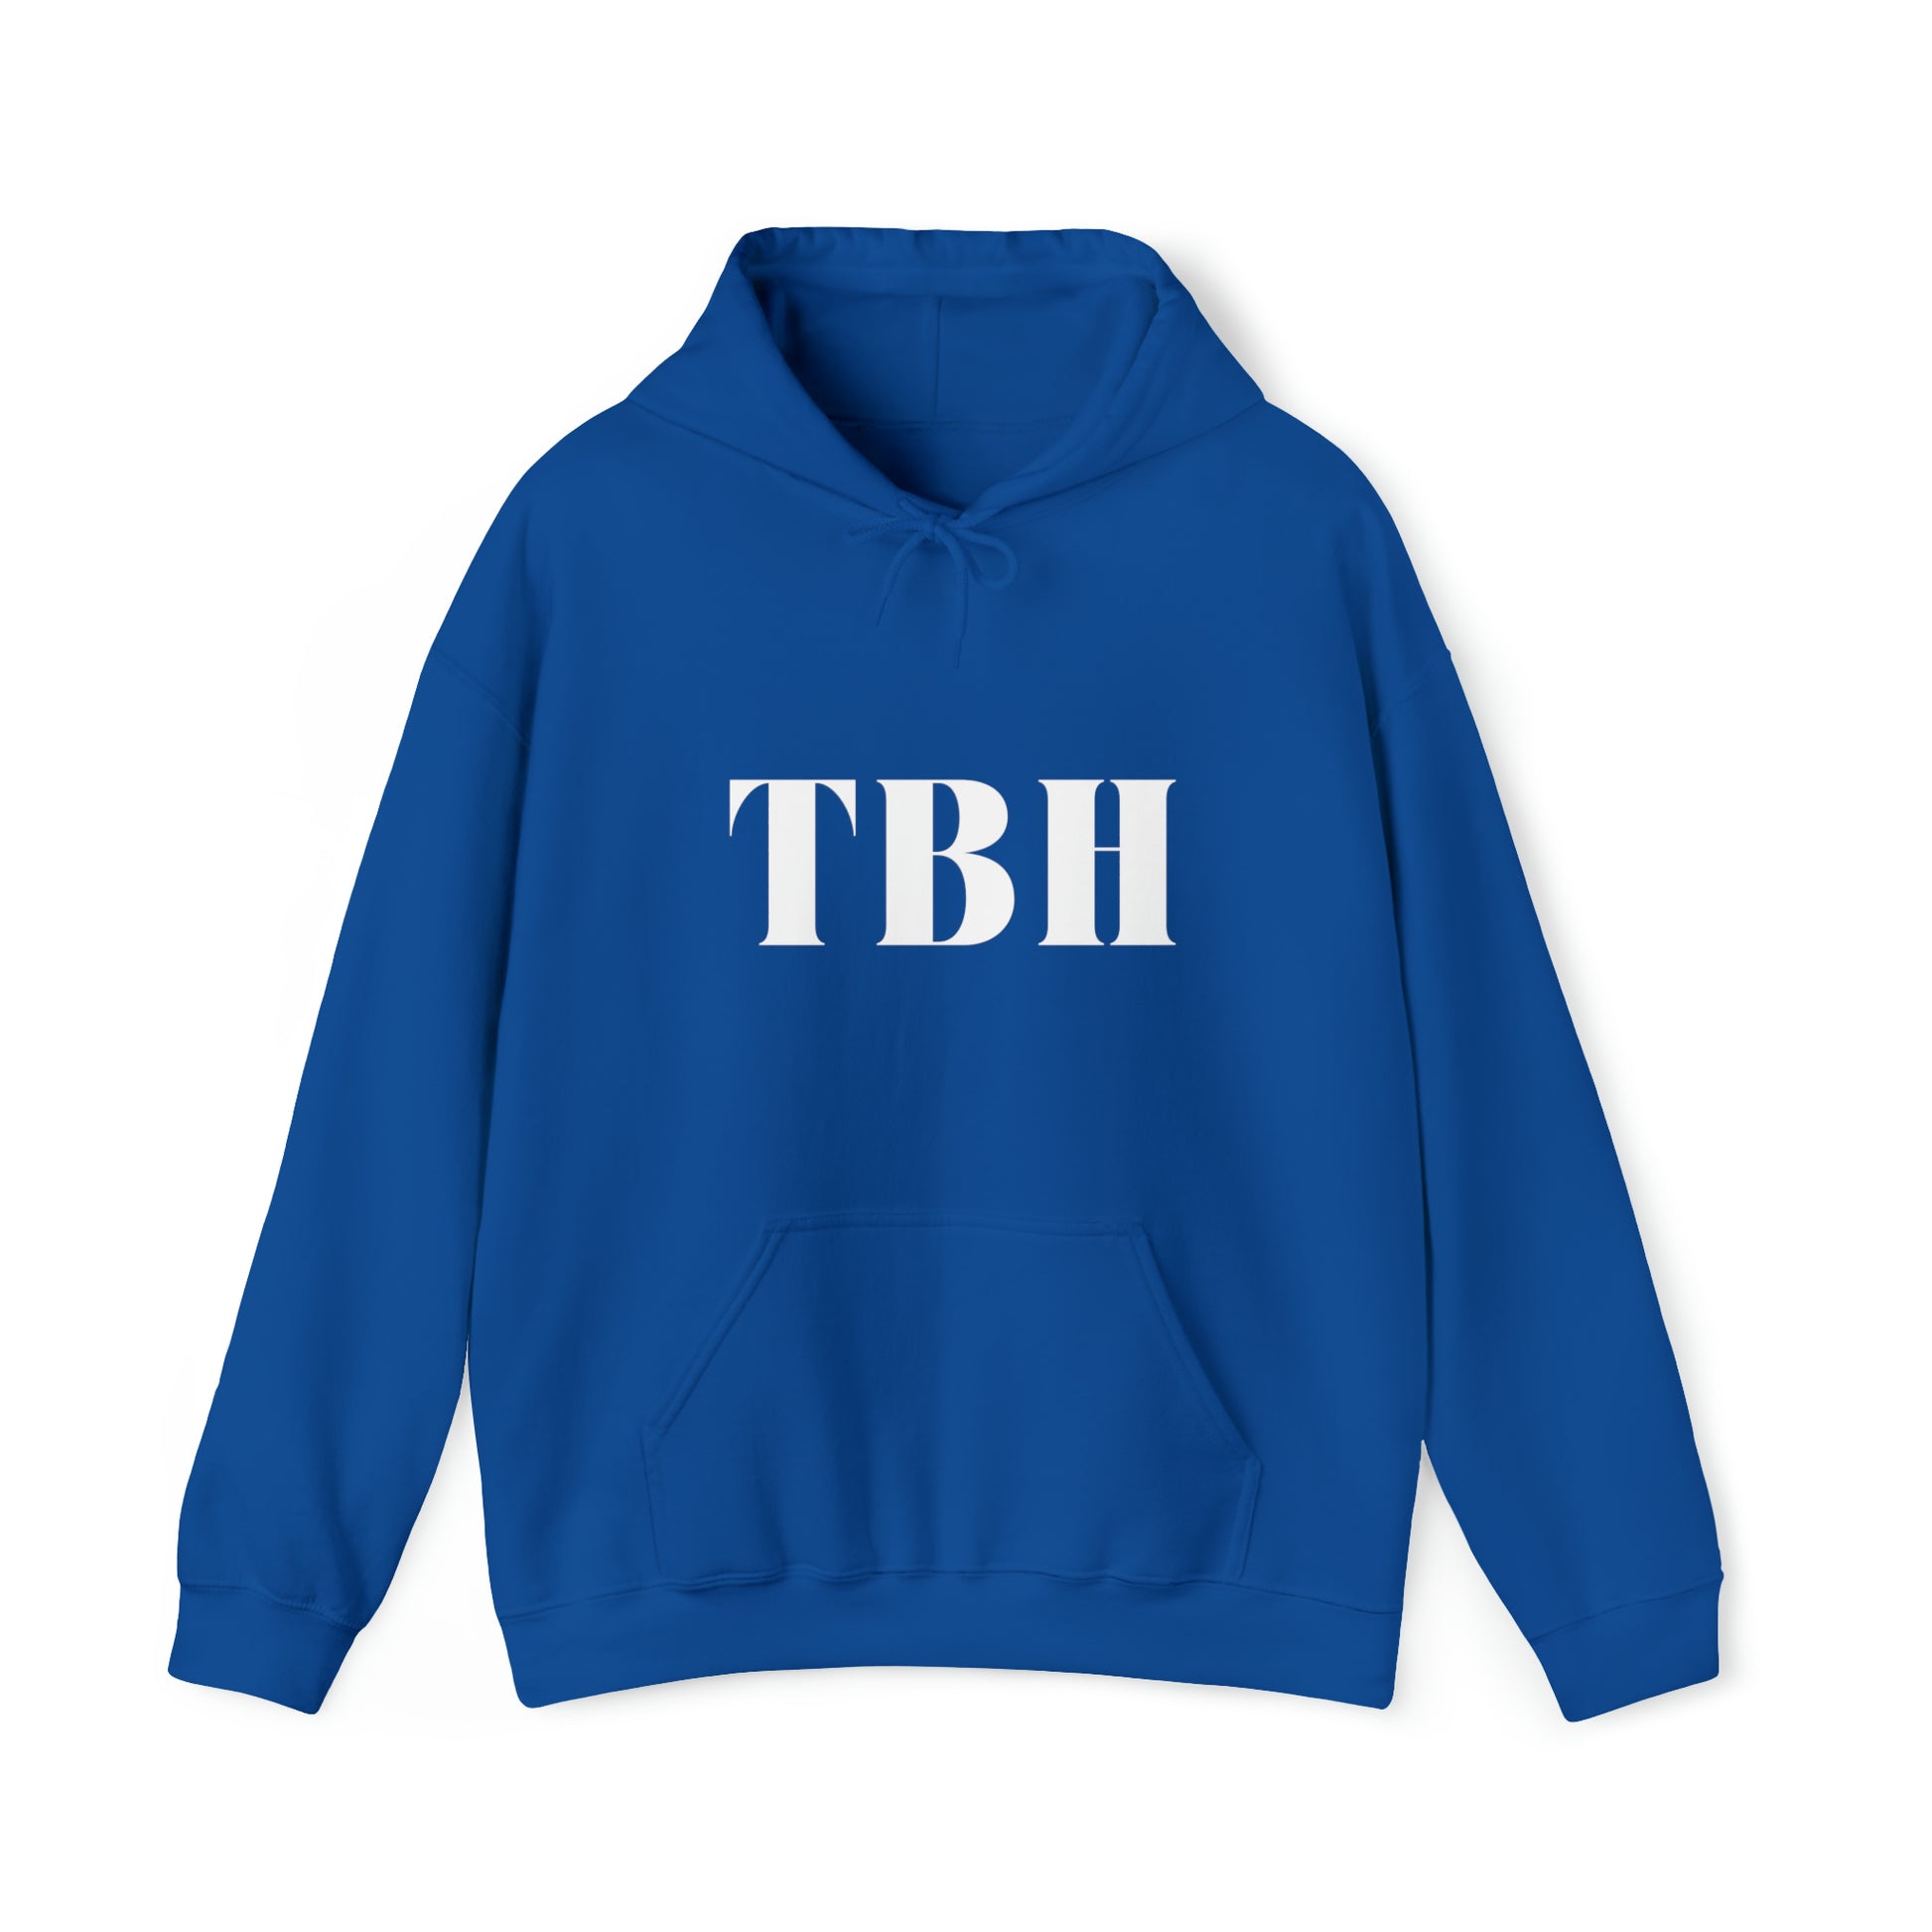 S Royal TBH Hoodie from HoodySZN.com